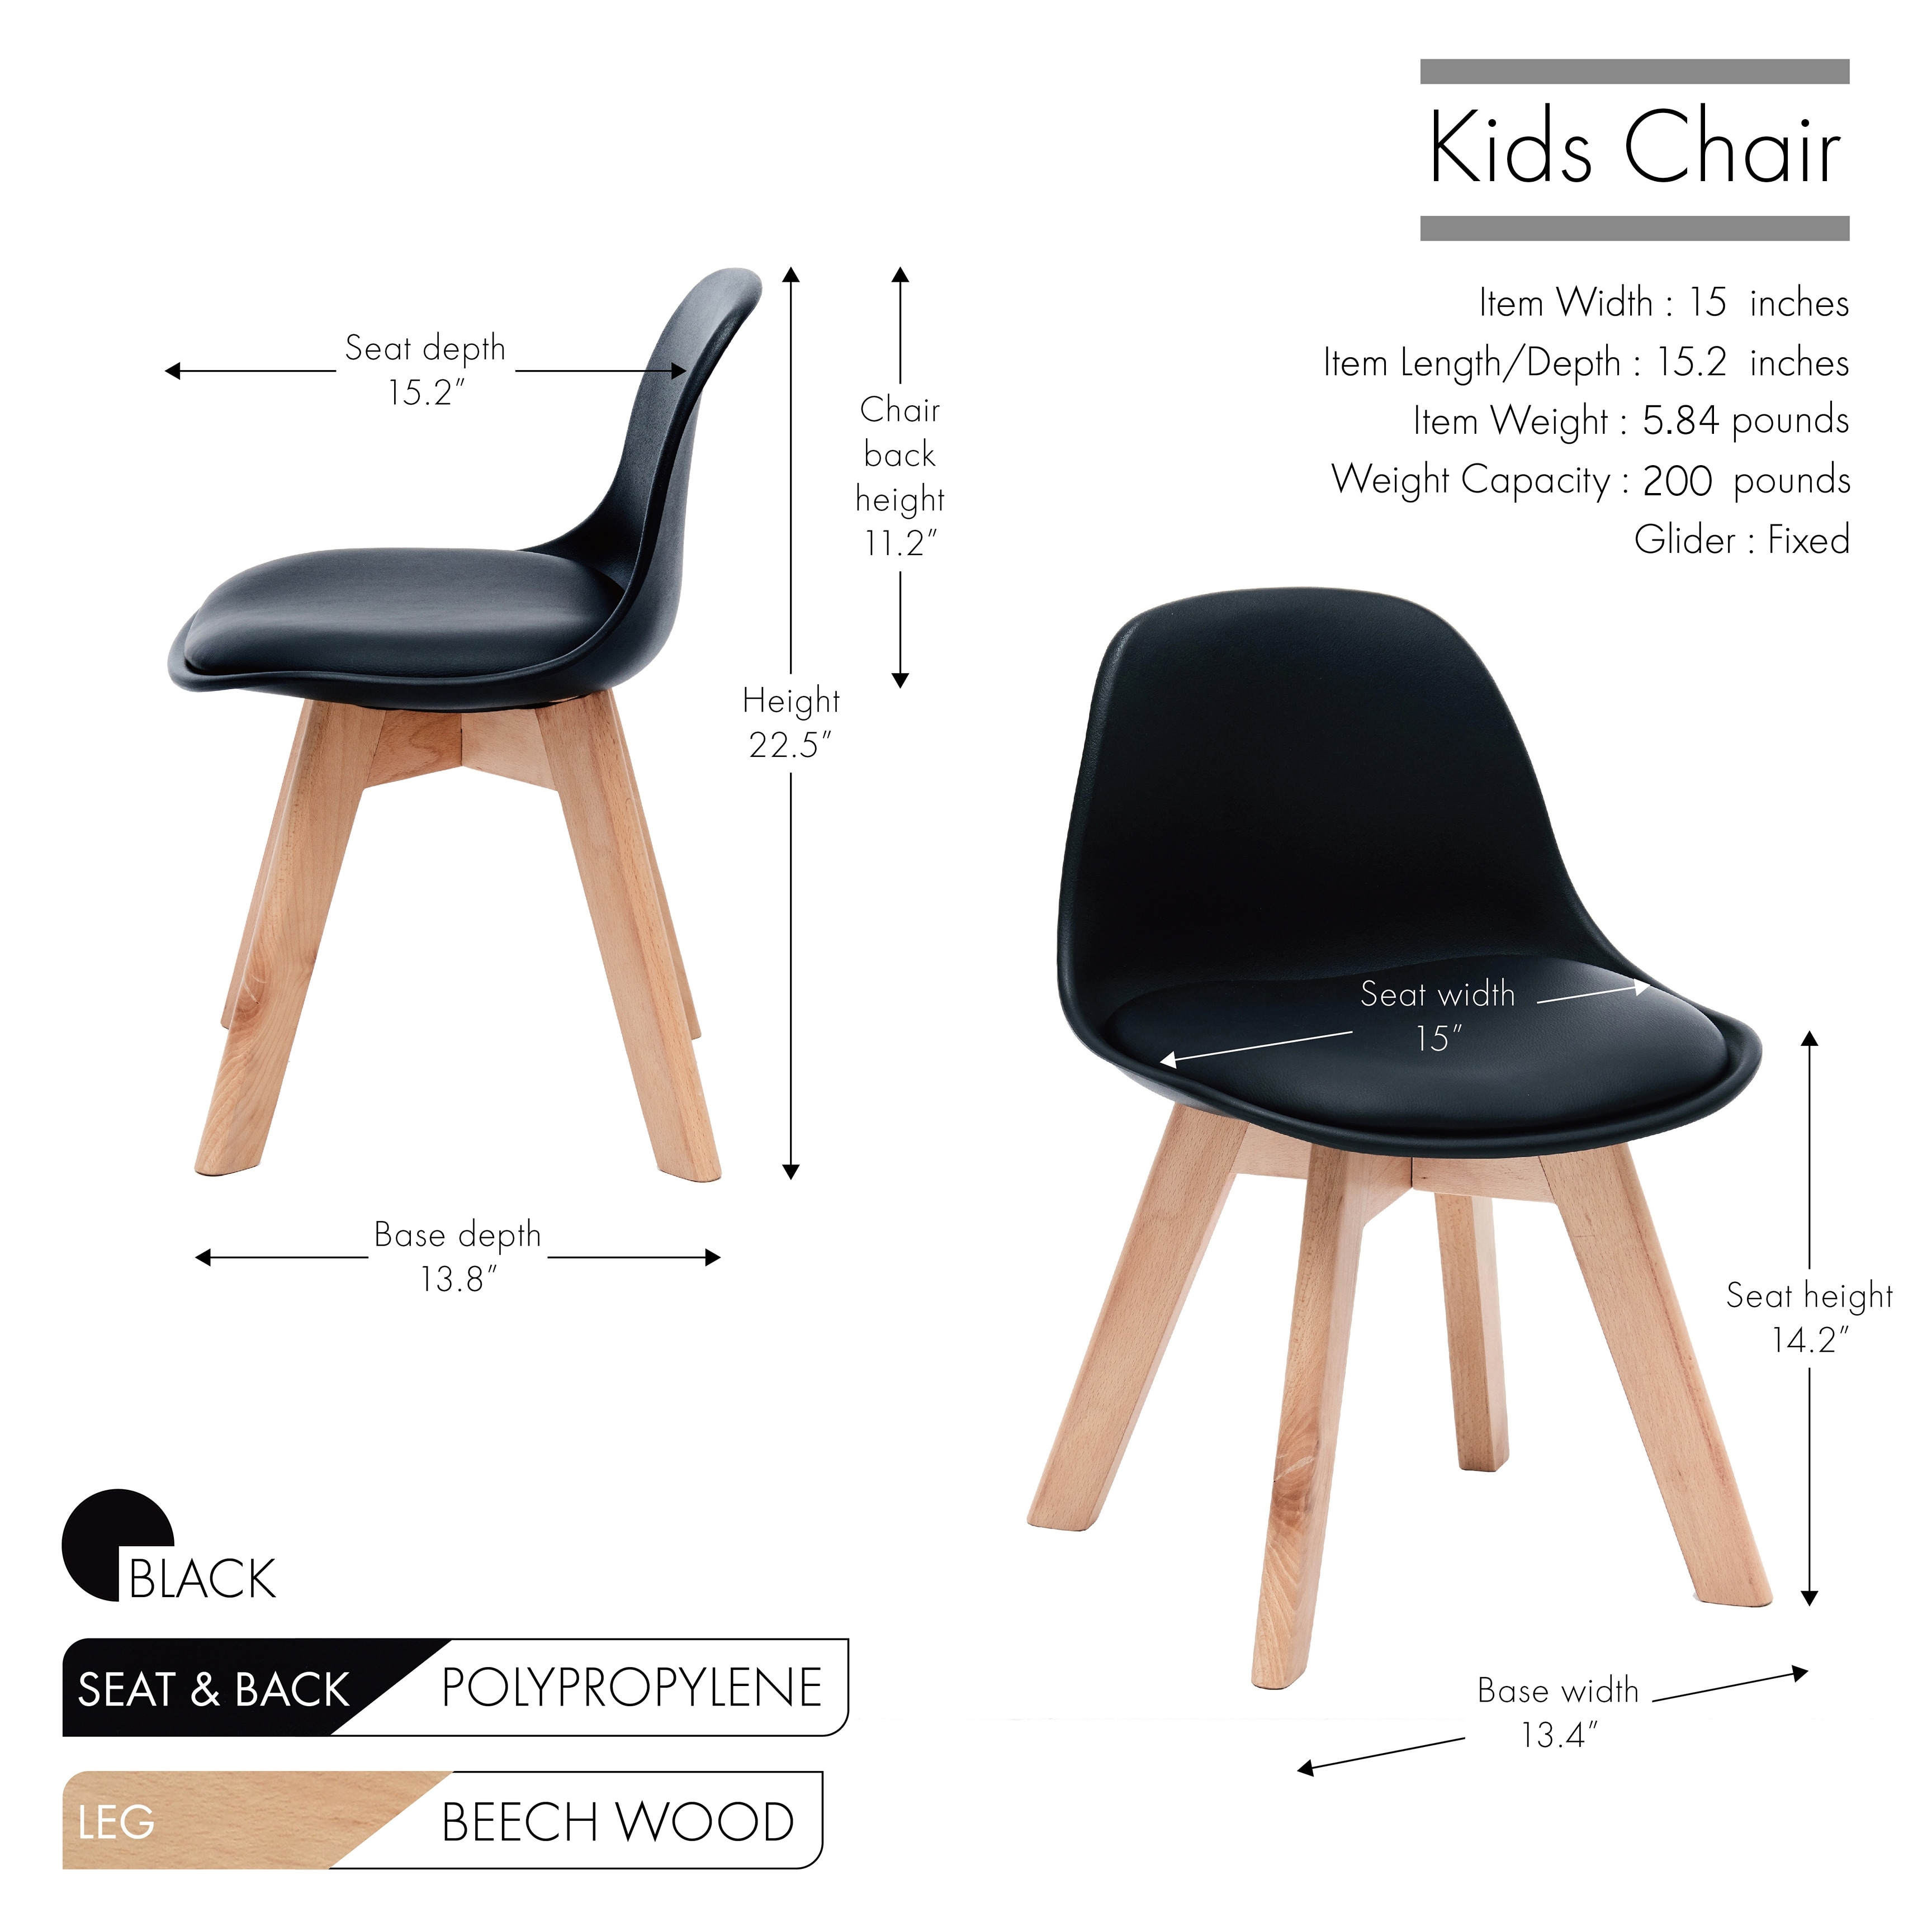 Plastic Shell with Seat Cushion Living Room and Playroom Porthos Home Brynn Kids Chair for Bedroom Sturdy Beech Wood Legs